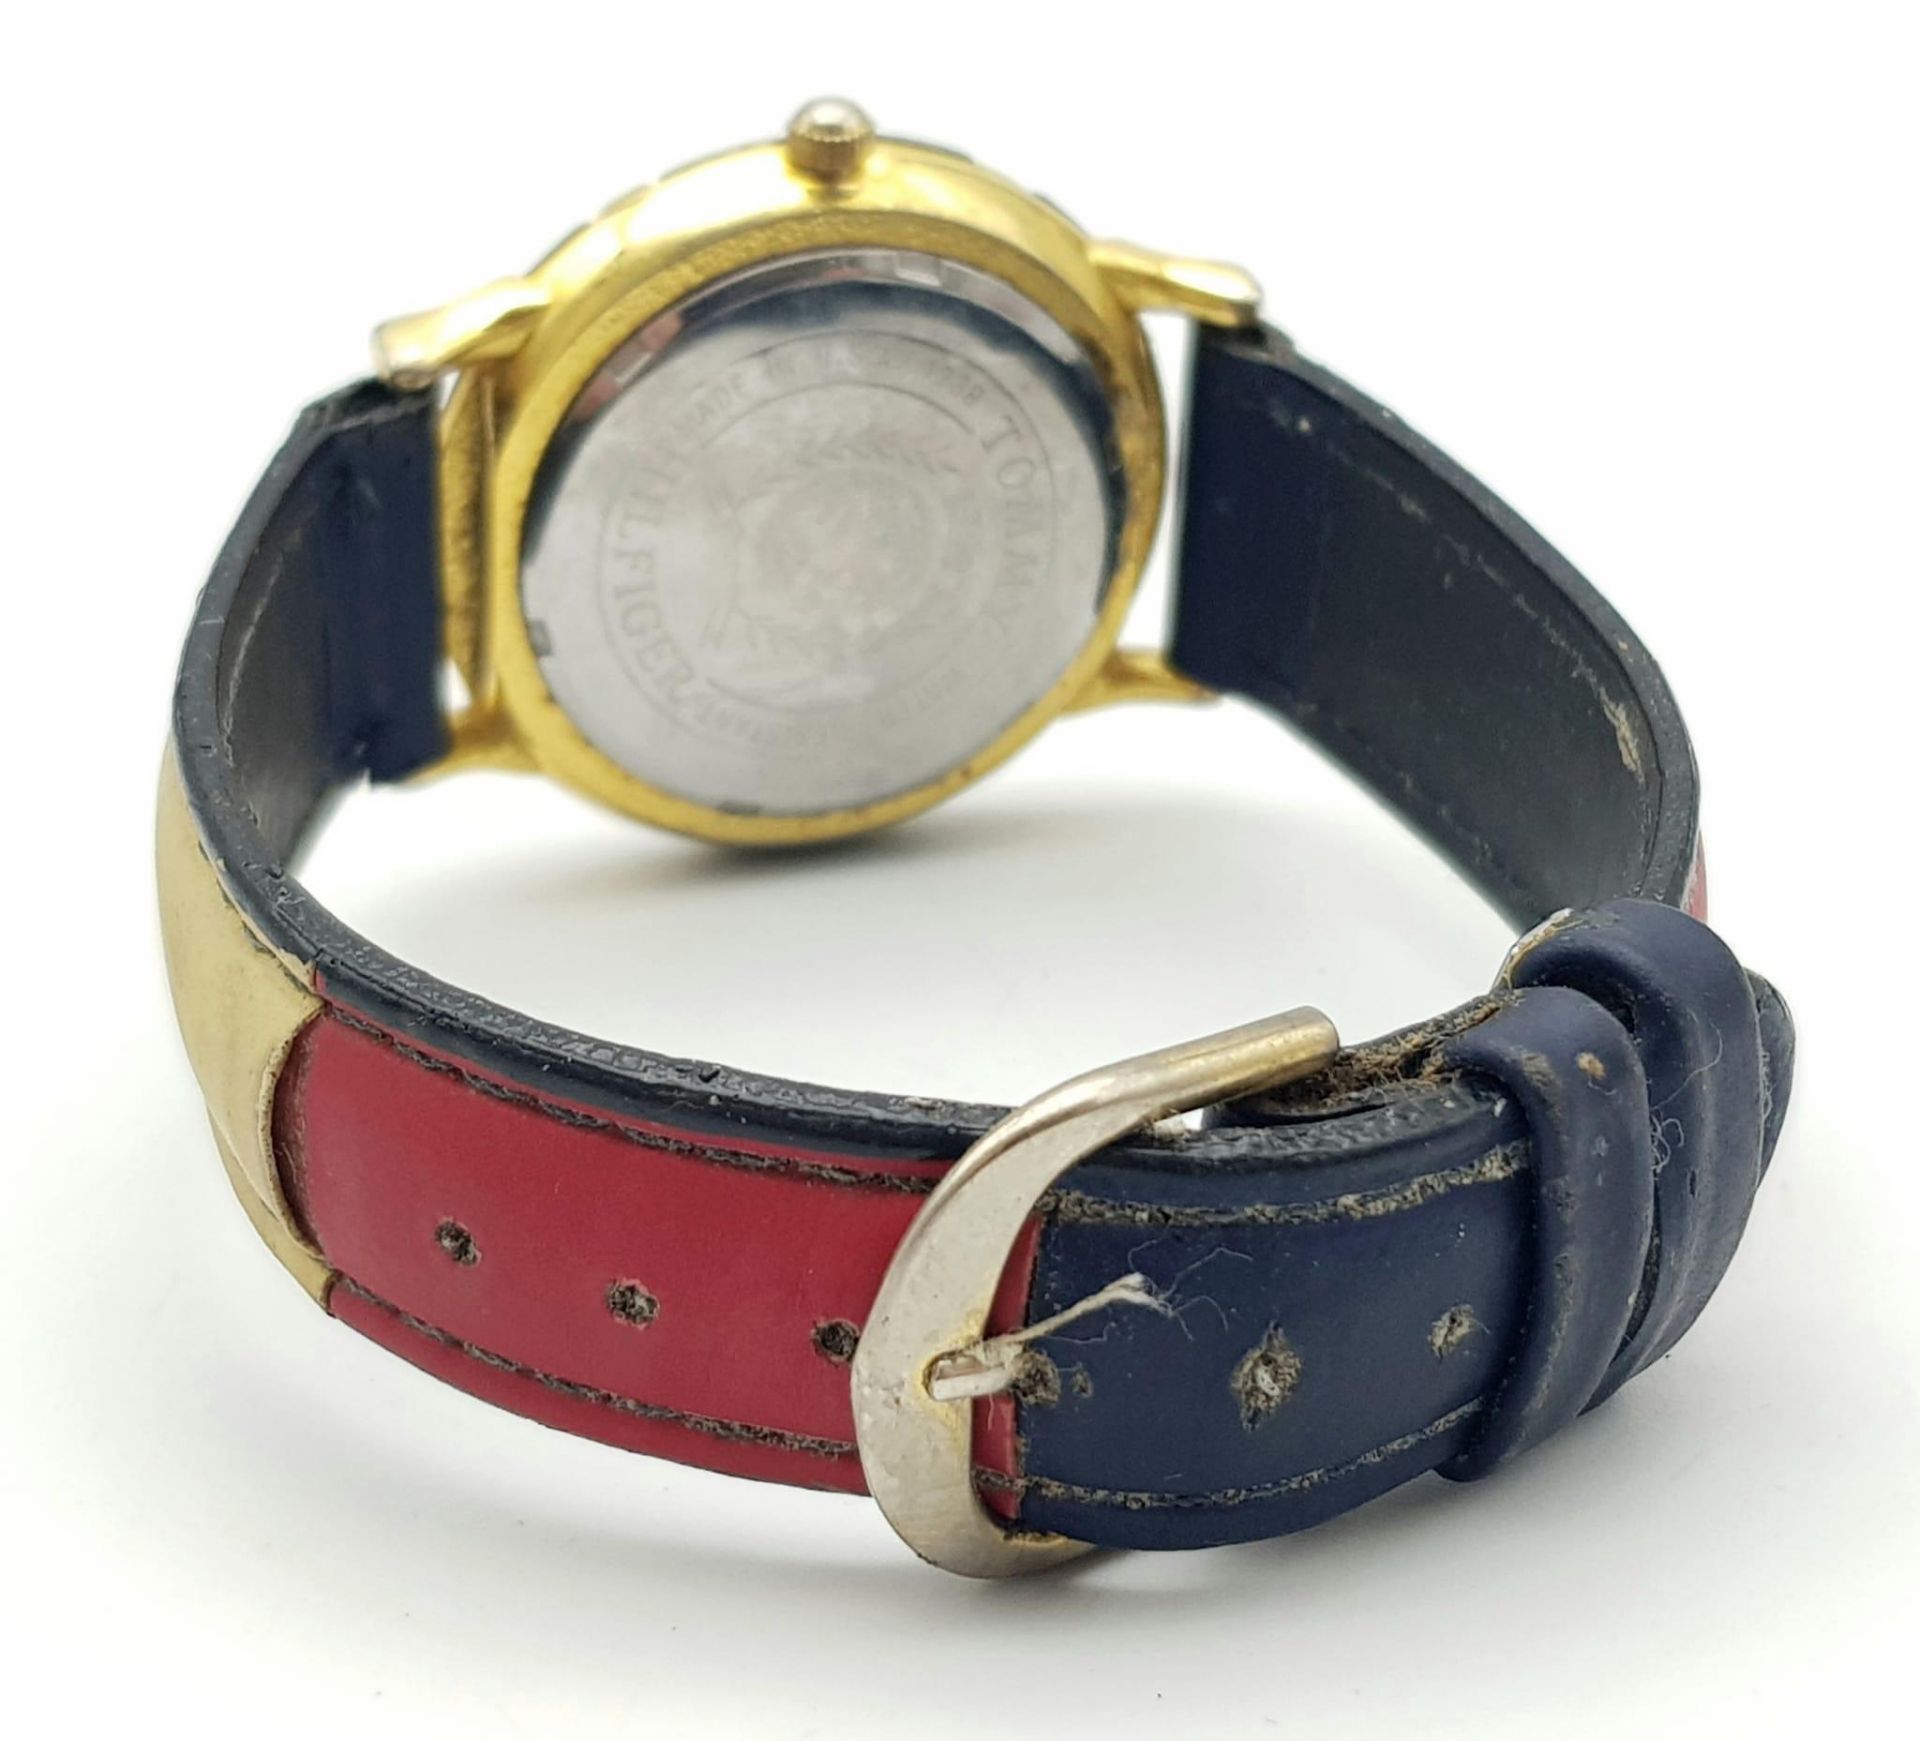 TOMMY HILFIGER WATCH REQUIRES NEW BATTERY AF - Image 4 of 5